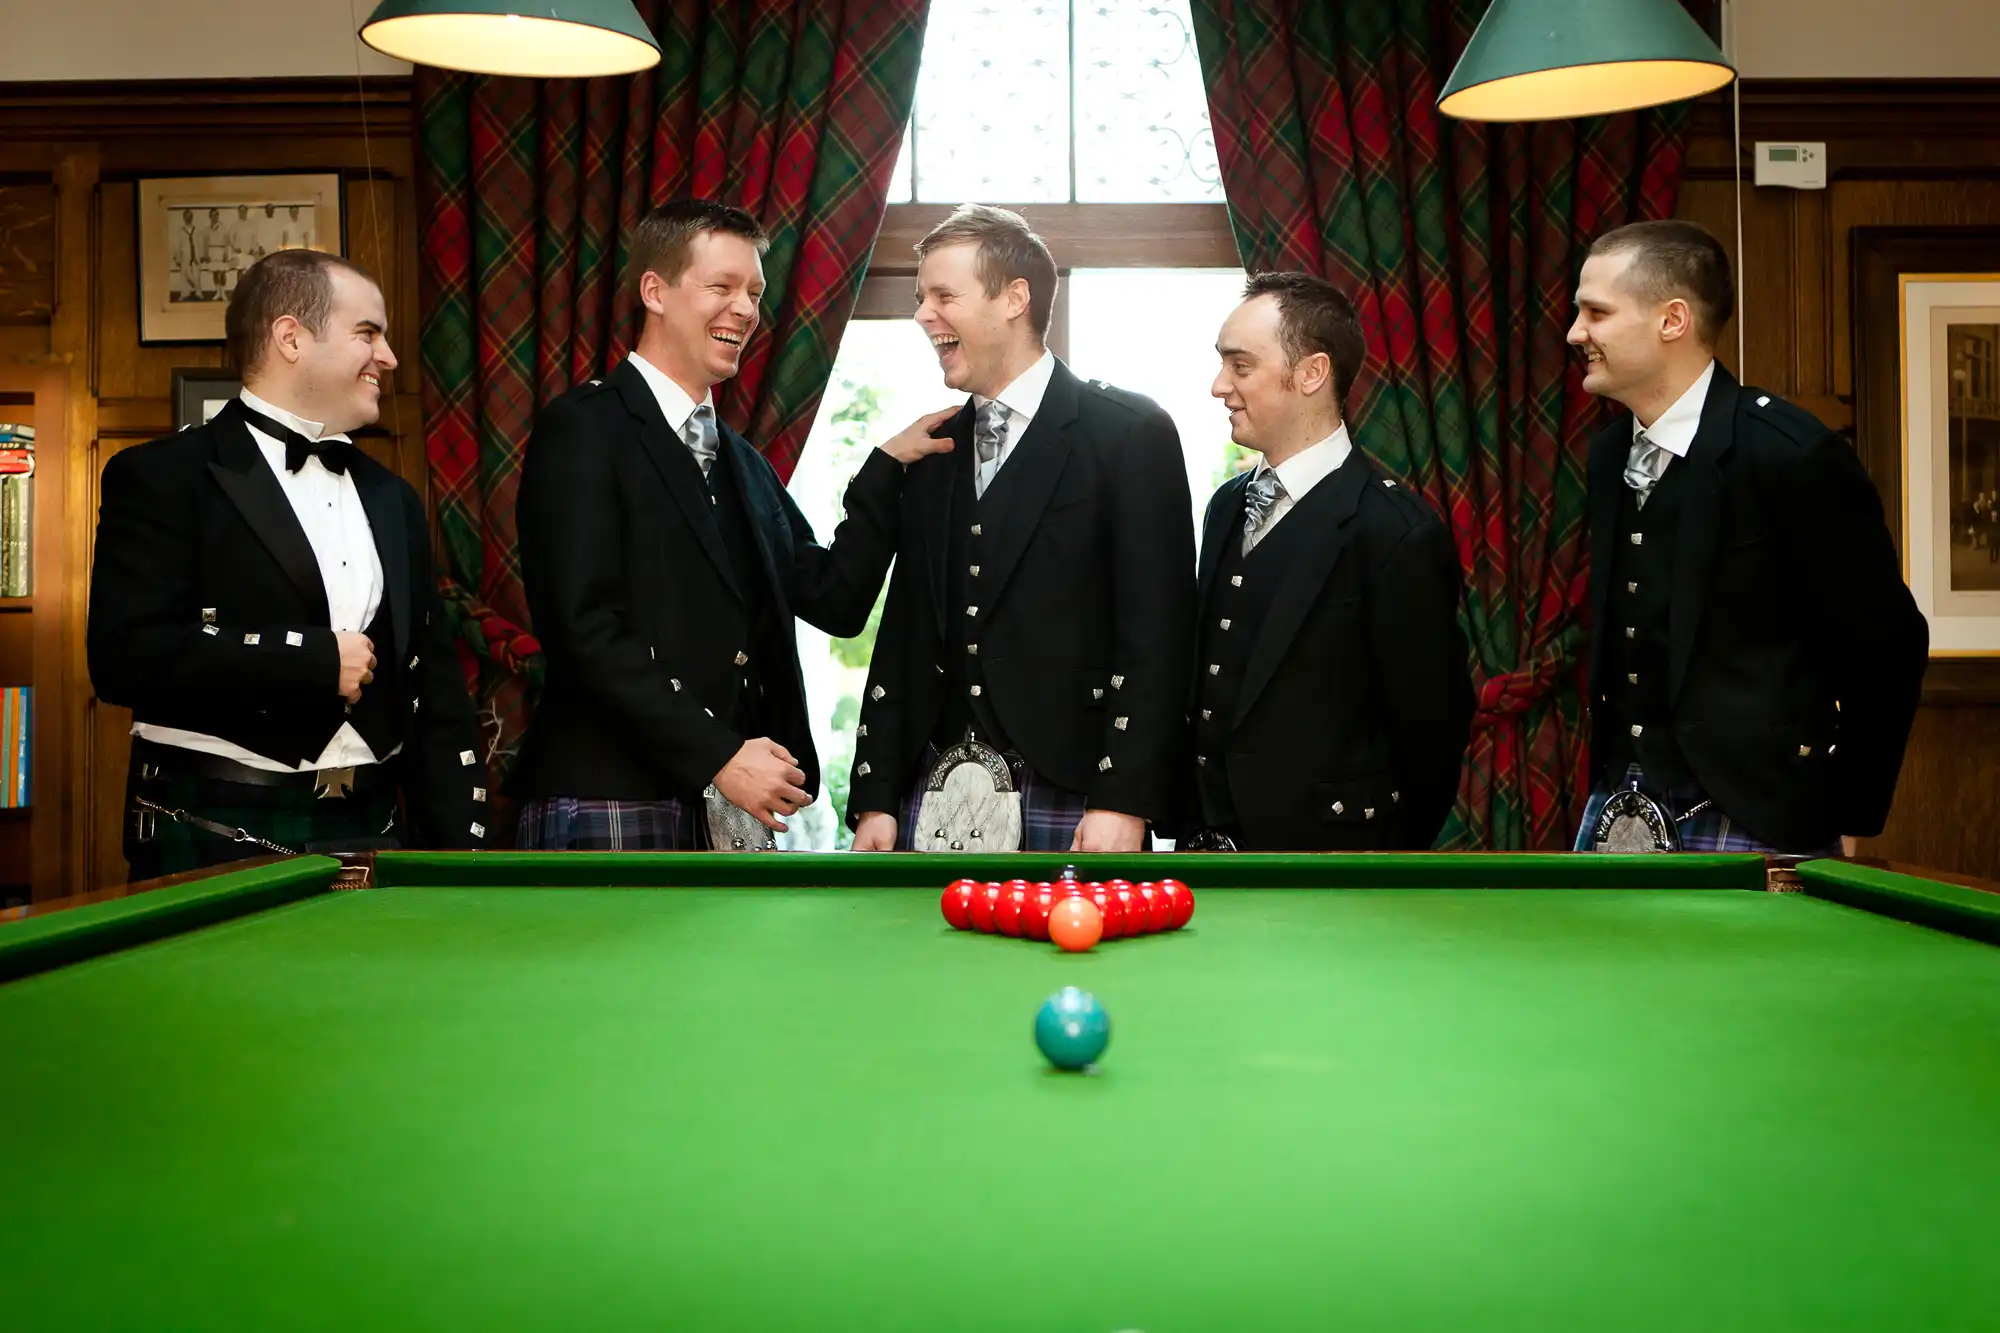 Five men in kilts and tuxedo jackets smiling and chatting around a billiards table in a warmly lit room.